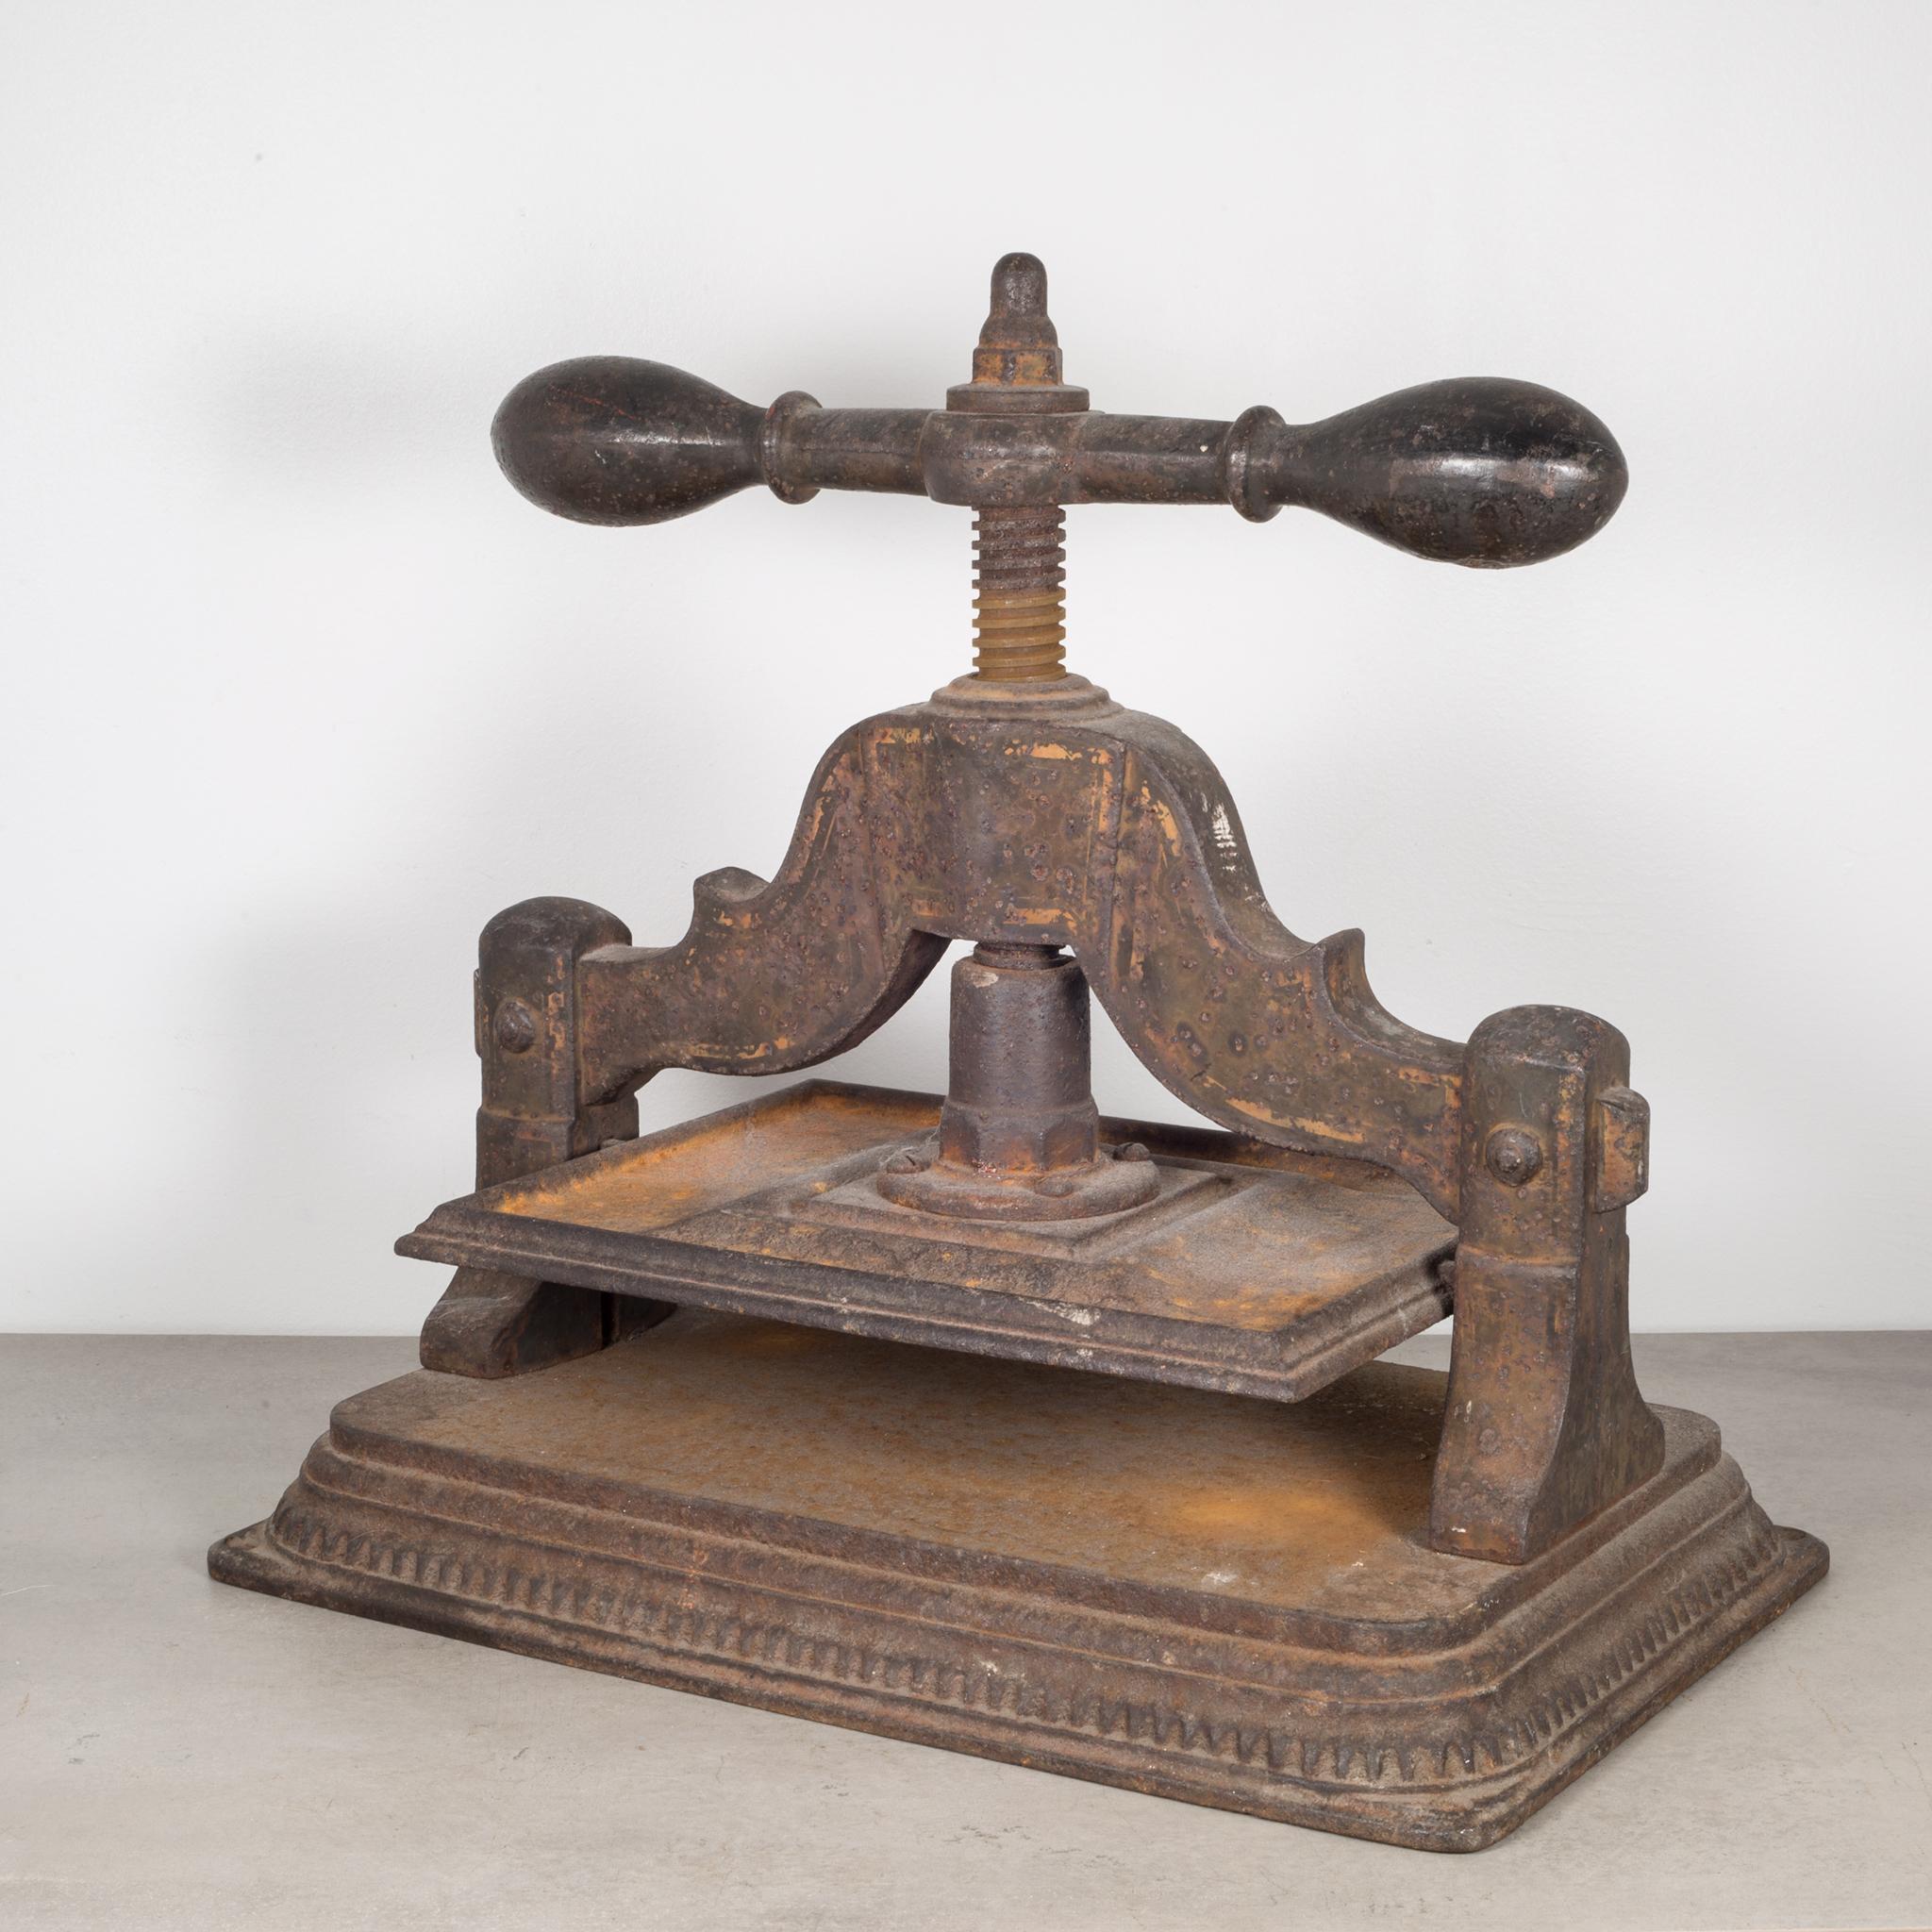 About:

This is an antique cast iron ball turn bar book press. The handle works properly and moves up and down. The press has retained some of the original stenciling on the body and is structurally sound.

Creator: Unknown.
Date of